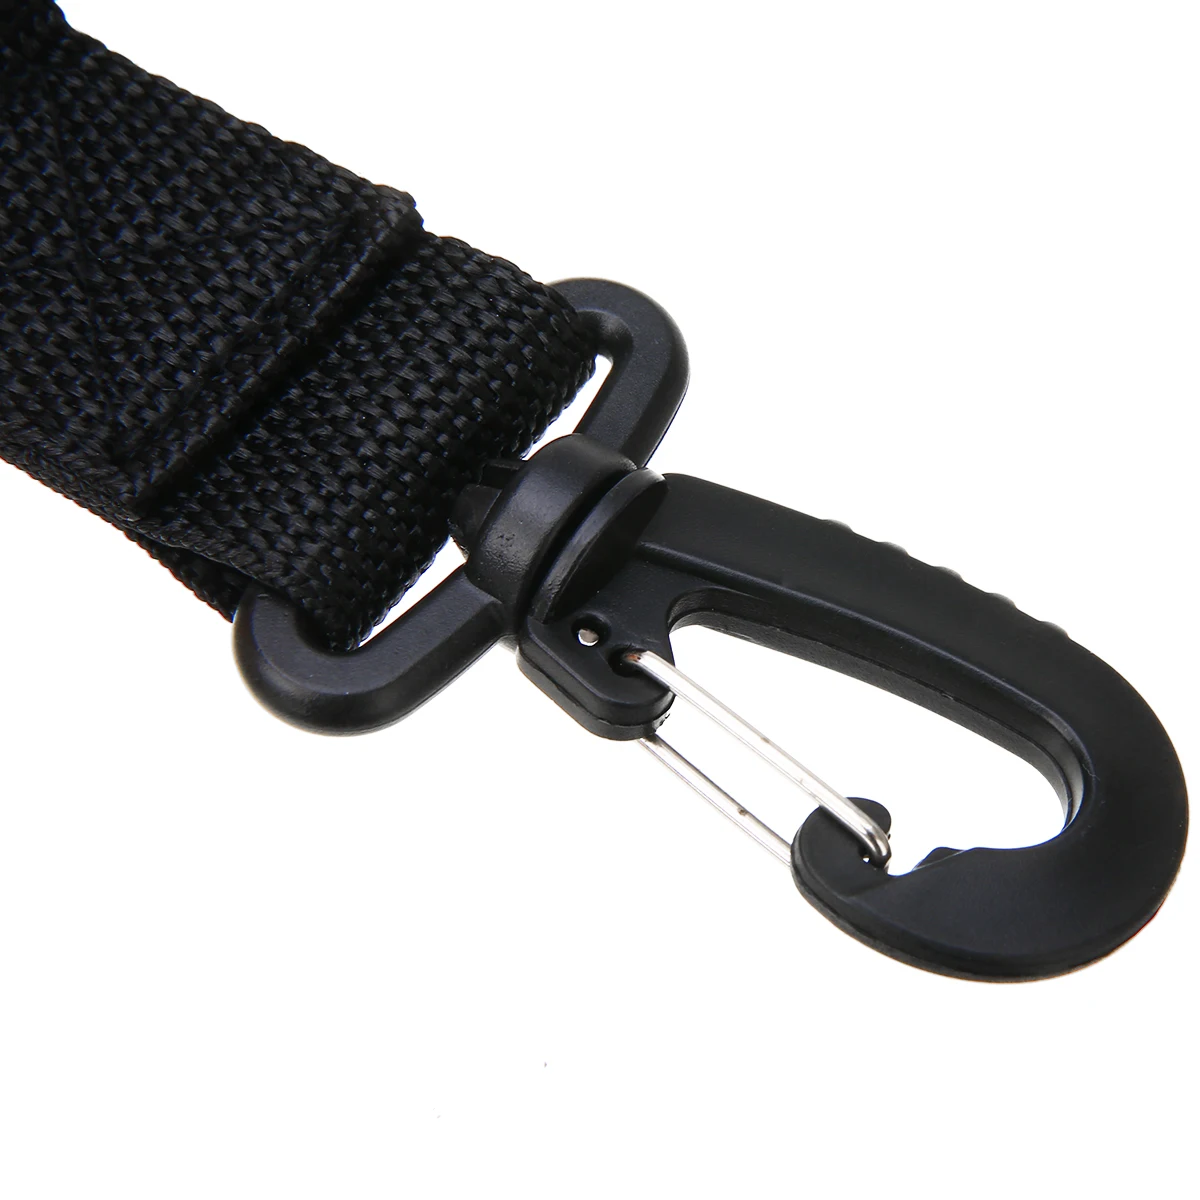 Mayitr 1 pcs Lanyard Spring Coil  Diving Dive Camera Scuba Diving Dive With Quick Release Buckle and Clips for Diving Outdoor